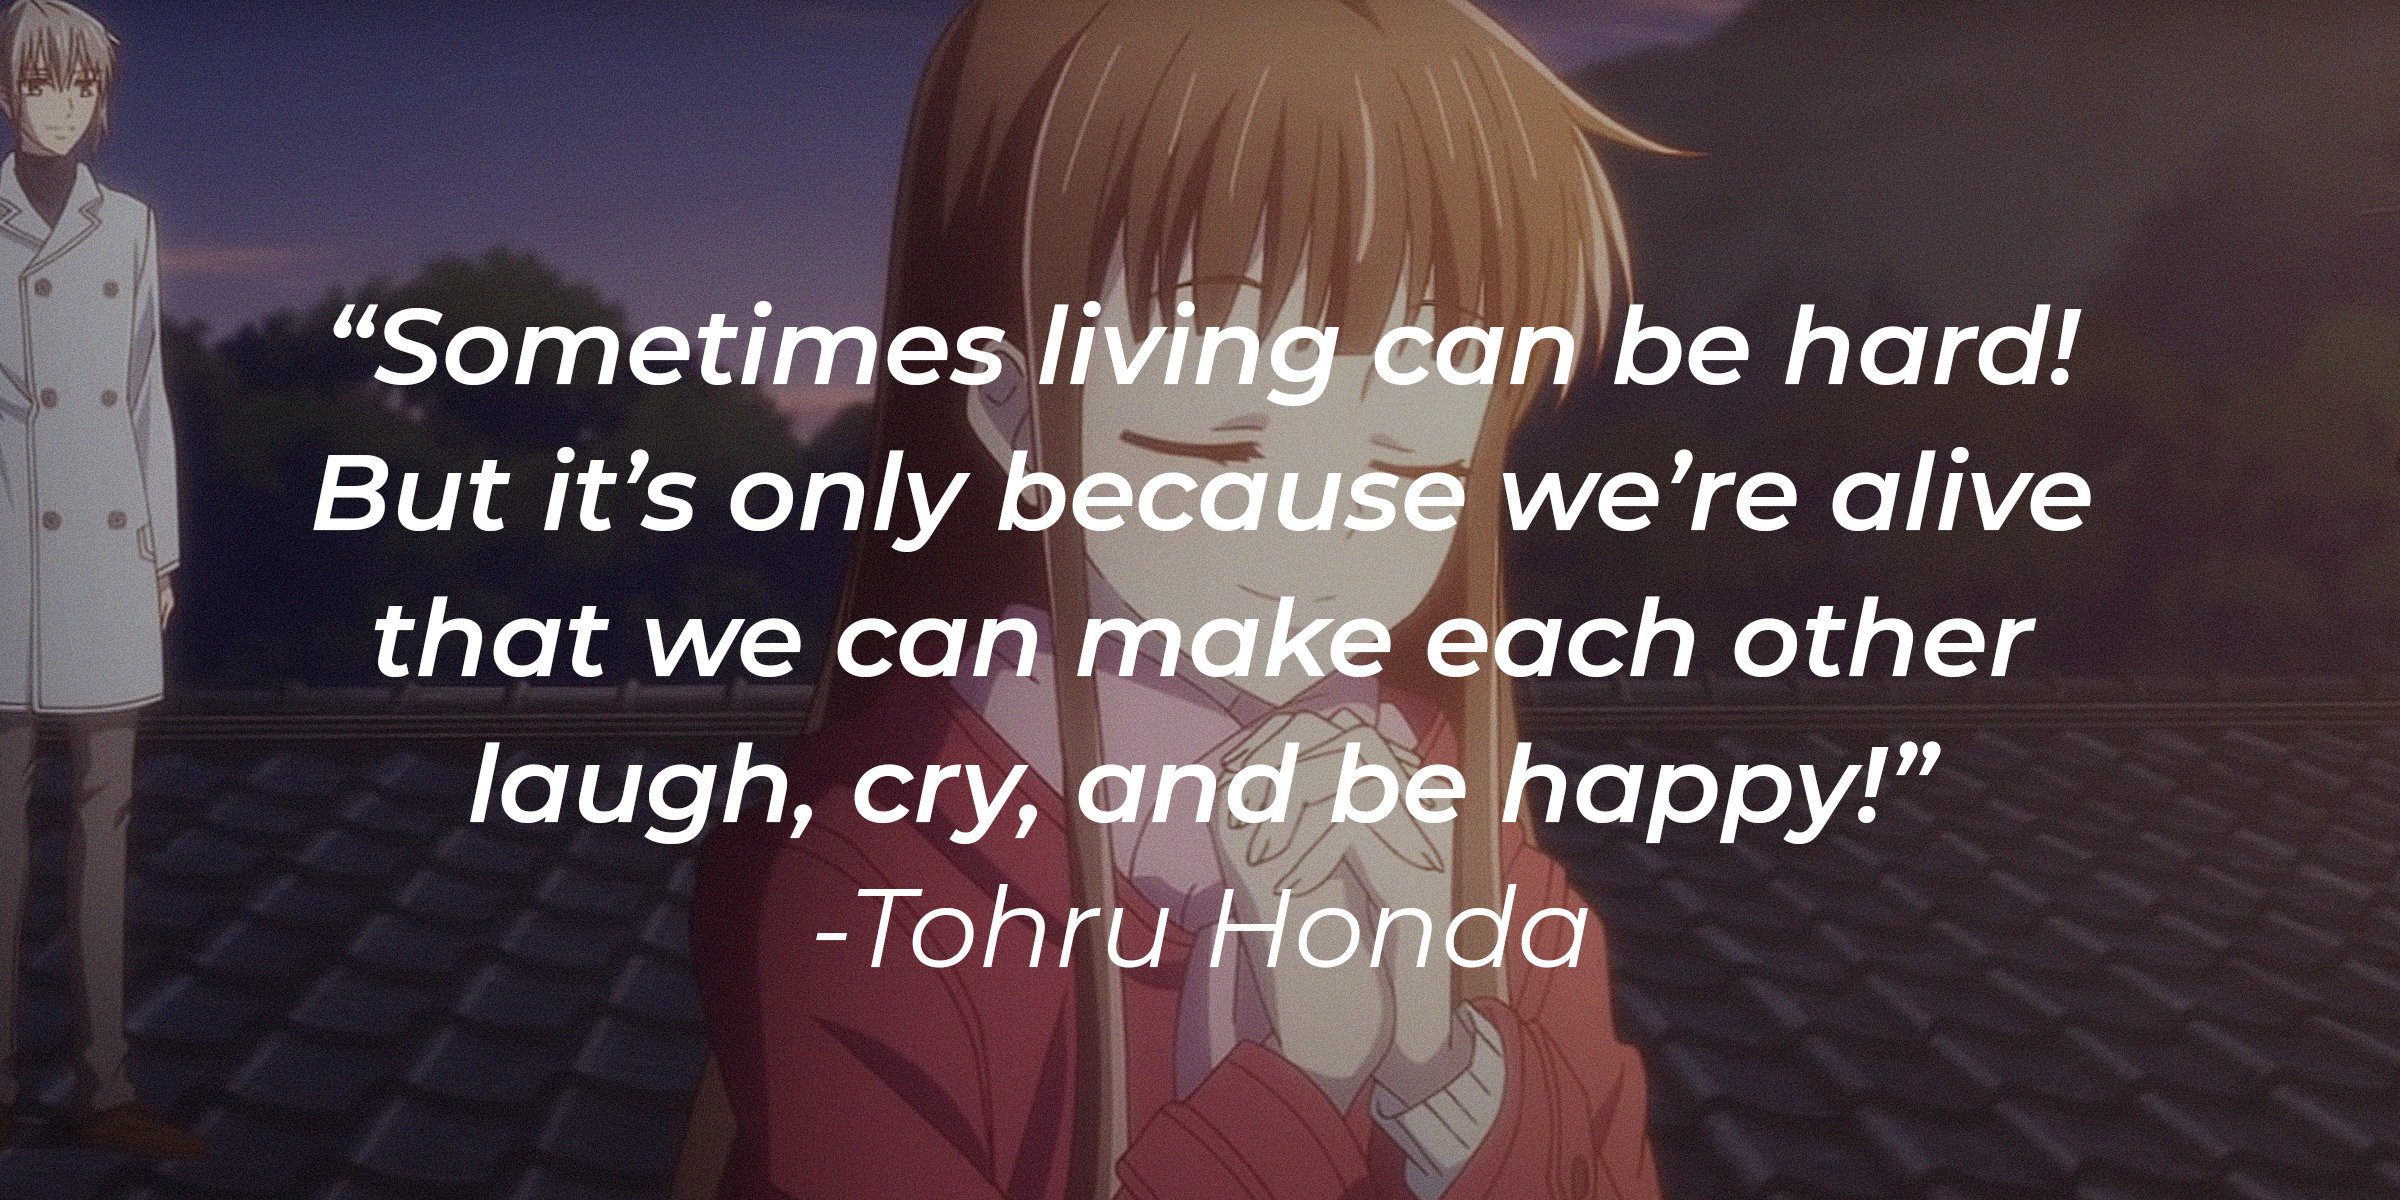 Source: Youtube.com/Crunchyroll Collection | A picture of Yuki Sohma and Tohru Honda with the quote: "Sometimes living can be hard! But it's only because we're alive that we can make each other laugh, cry, and be happy!"